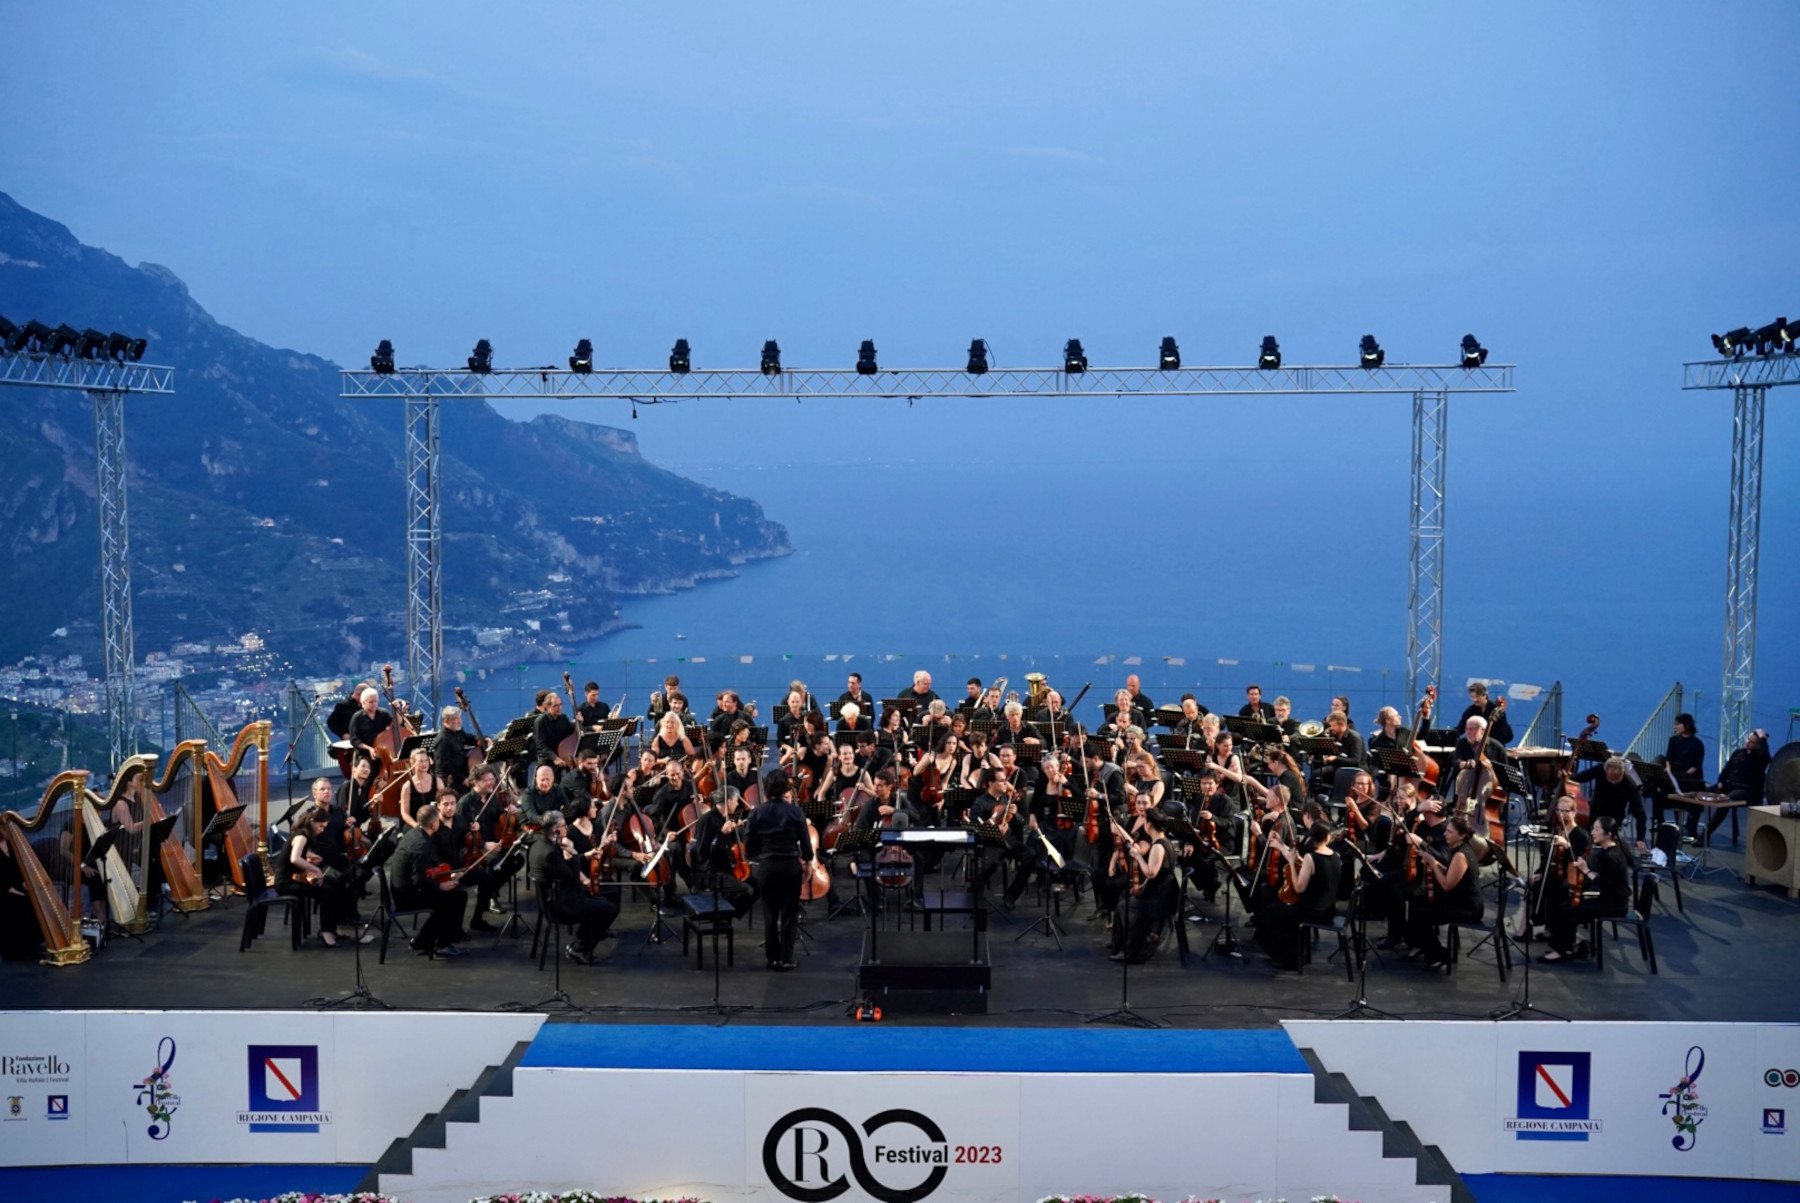 The Stage of the Ravello Festival